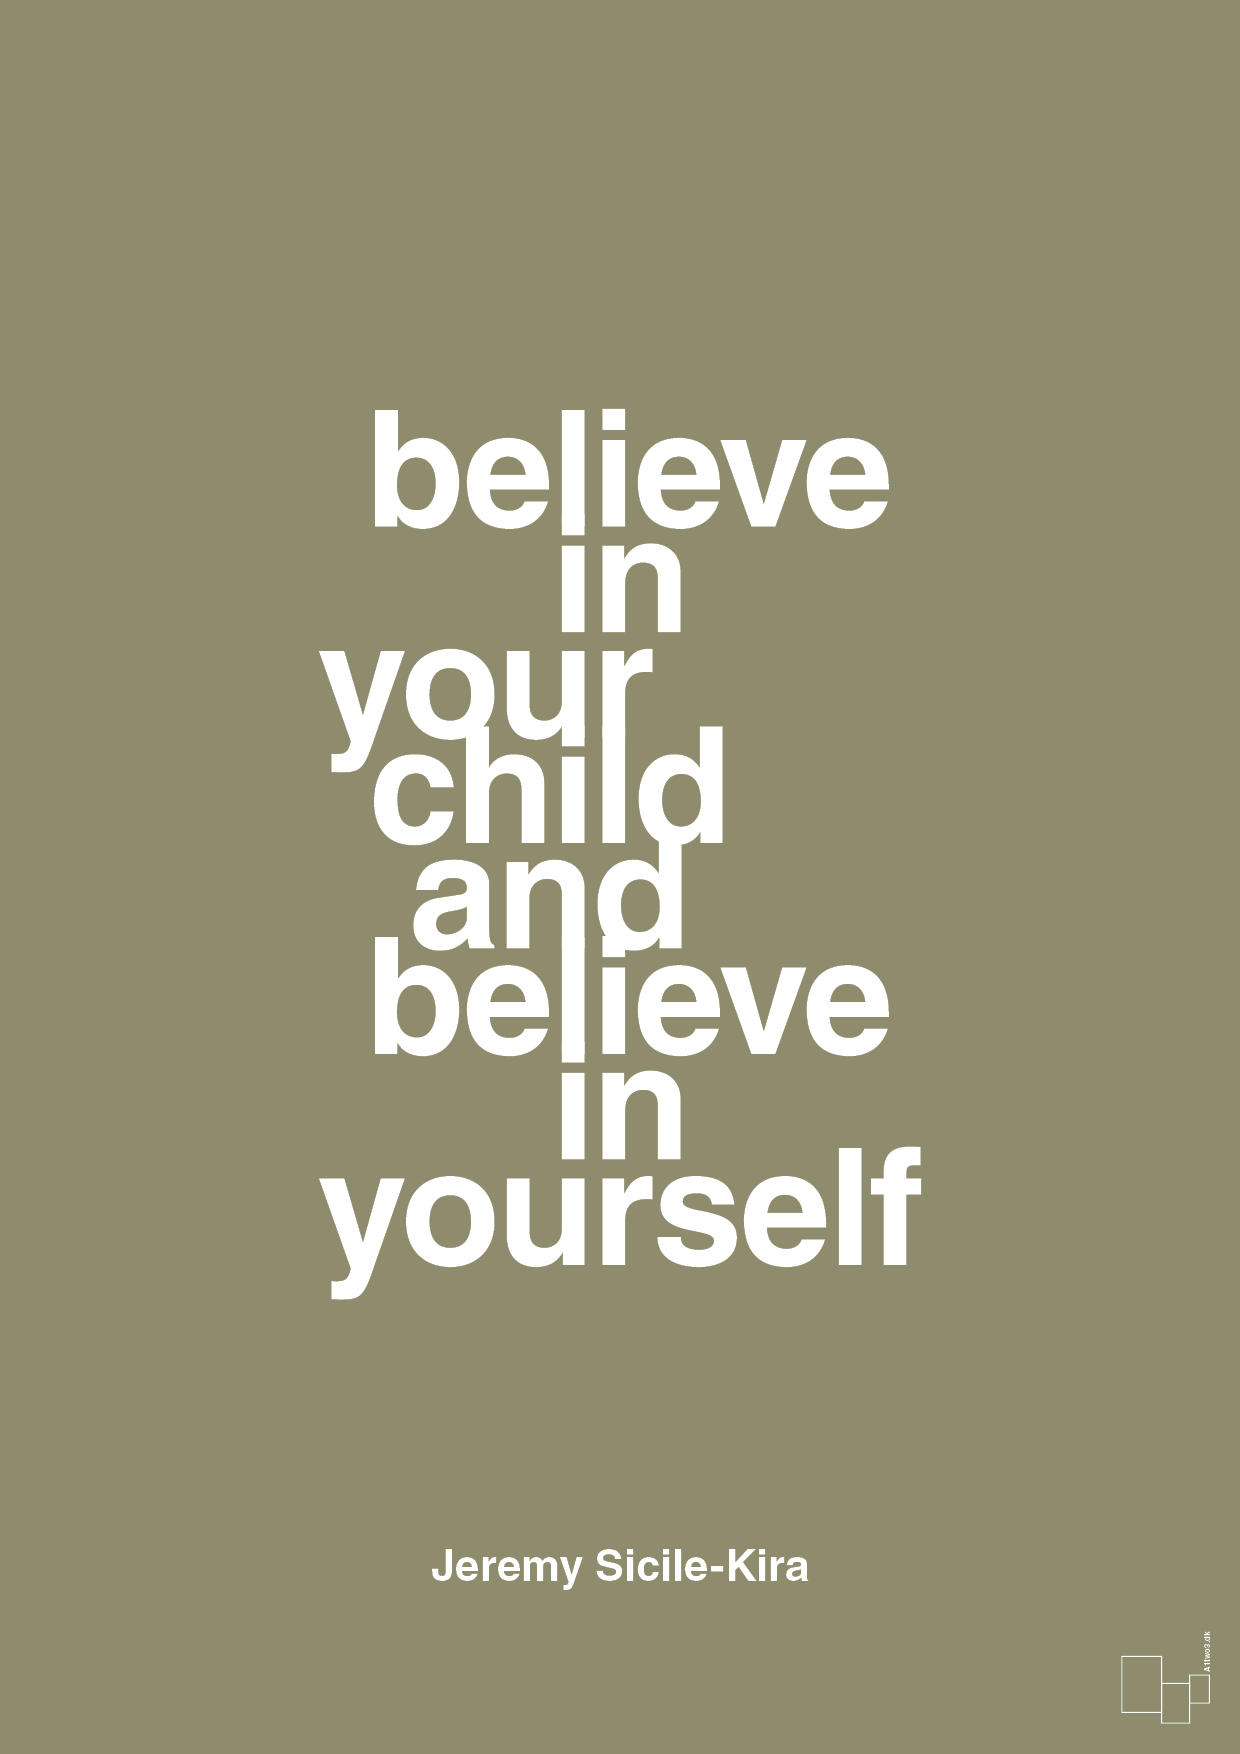 believe in your child and believe in yourself - Plakat med Samfund i Misty Forrest